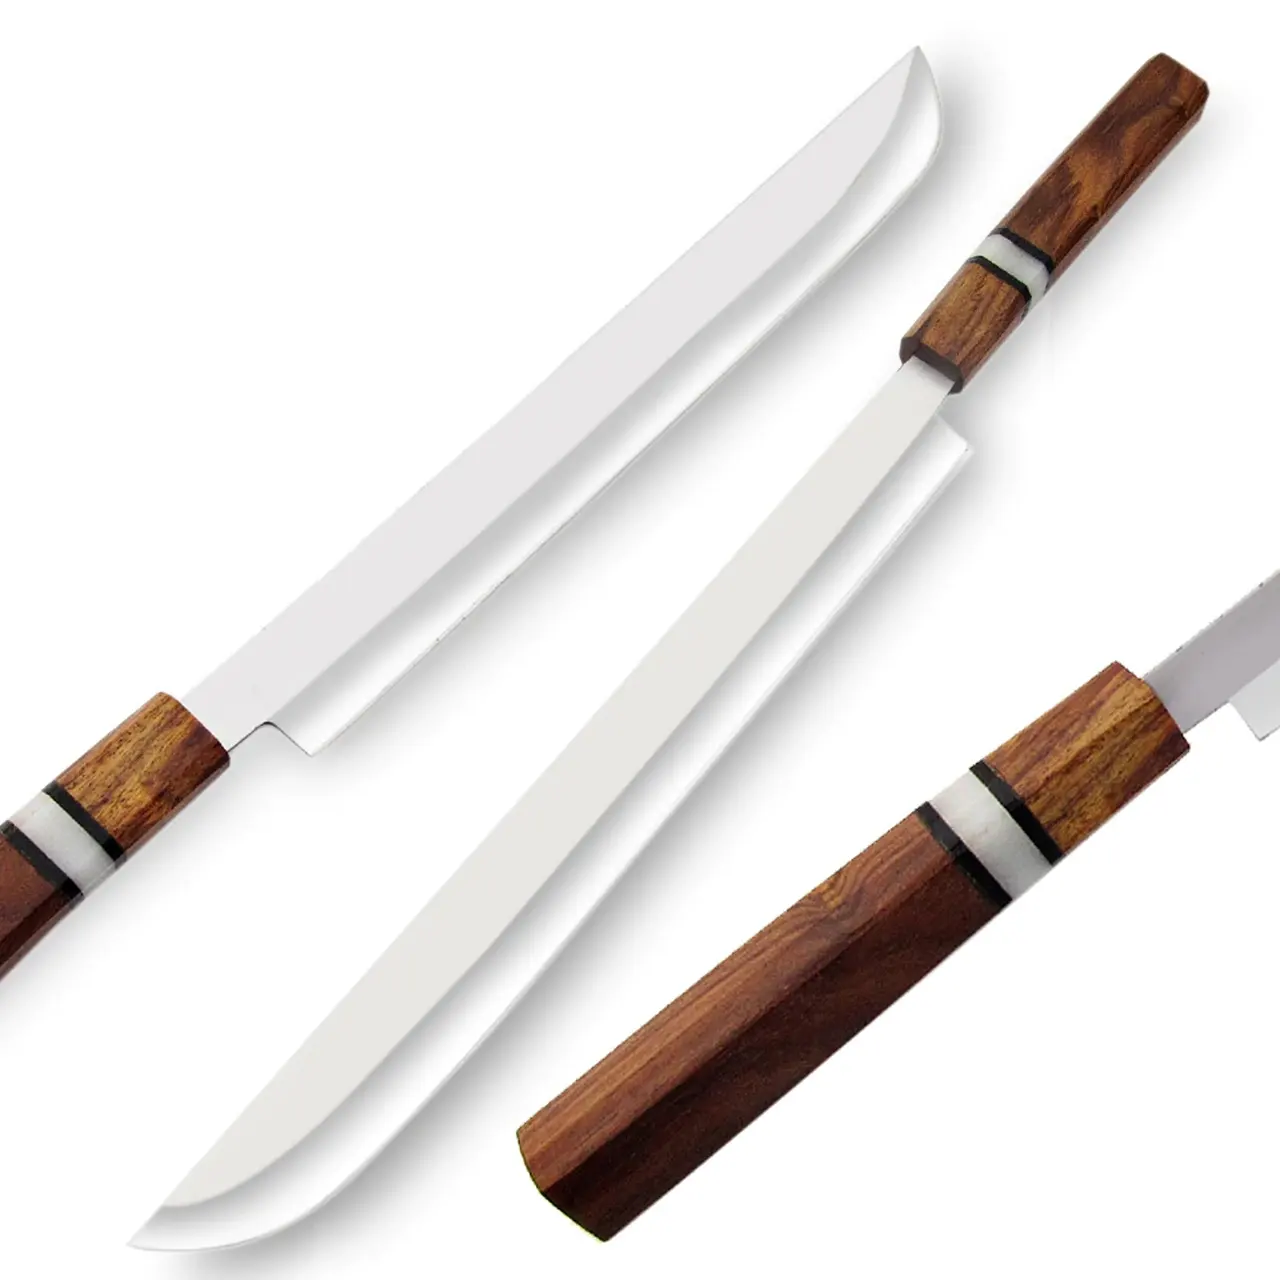 Hot selling Filleting Knife slicing carving kitchen knives Japanese Style kitchen knife With Rose Wood Handle